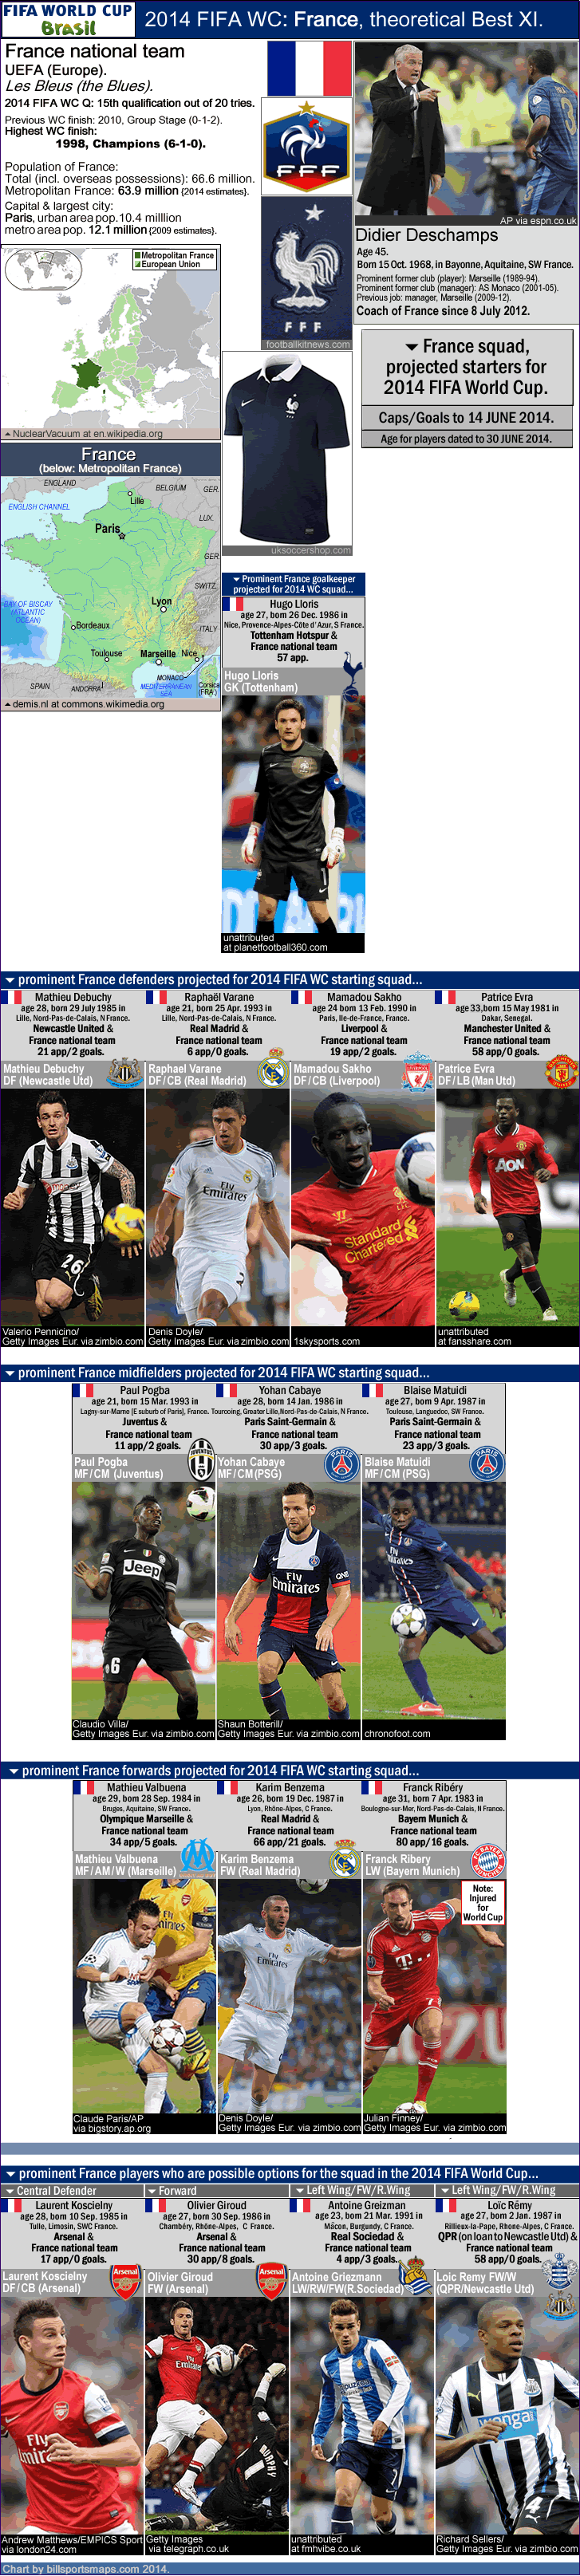 france_2014-fifa-world-cup_squad_best-xi_alternate-options_t.gif